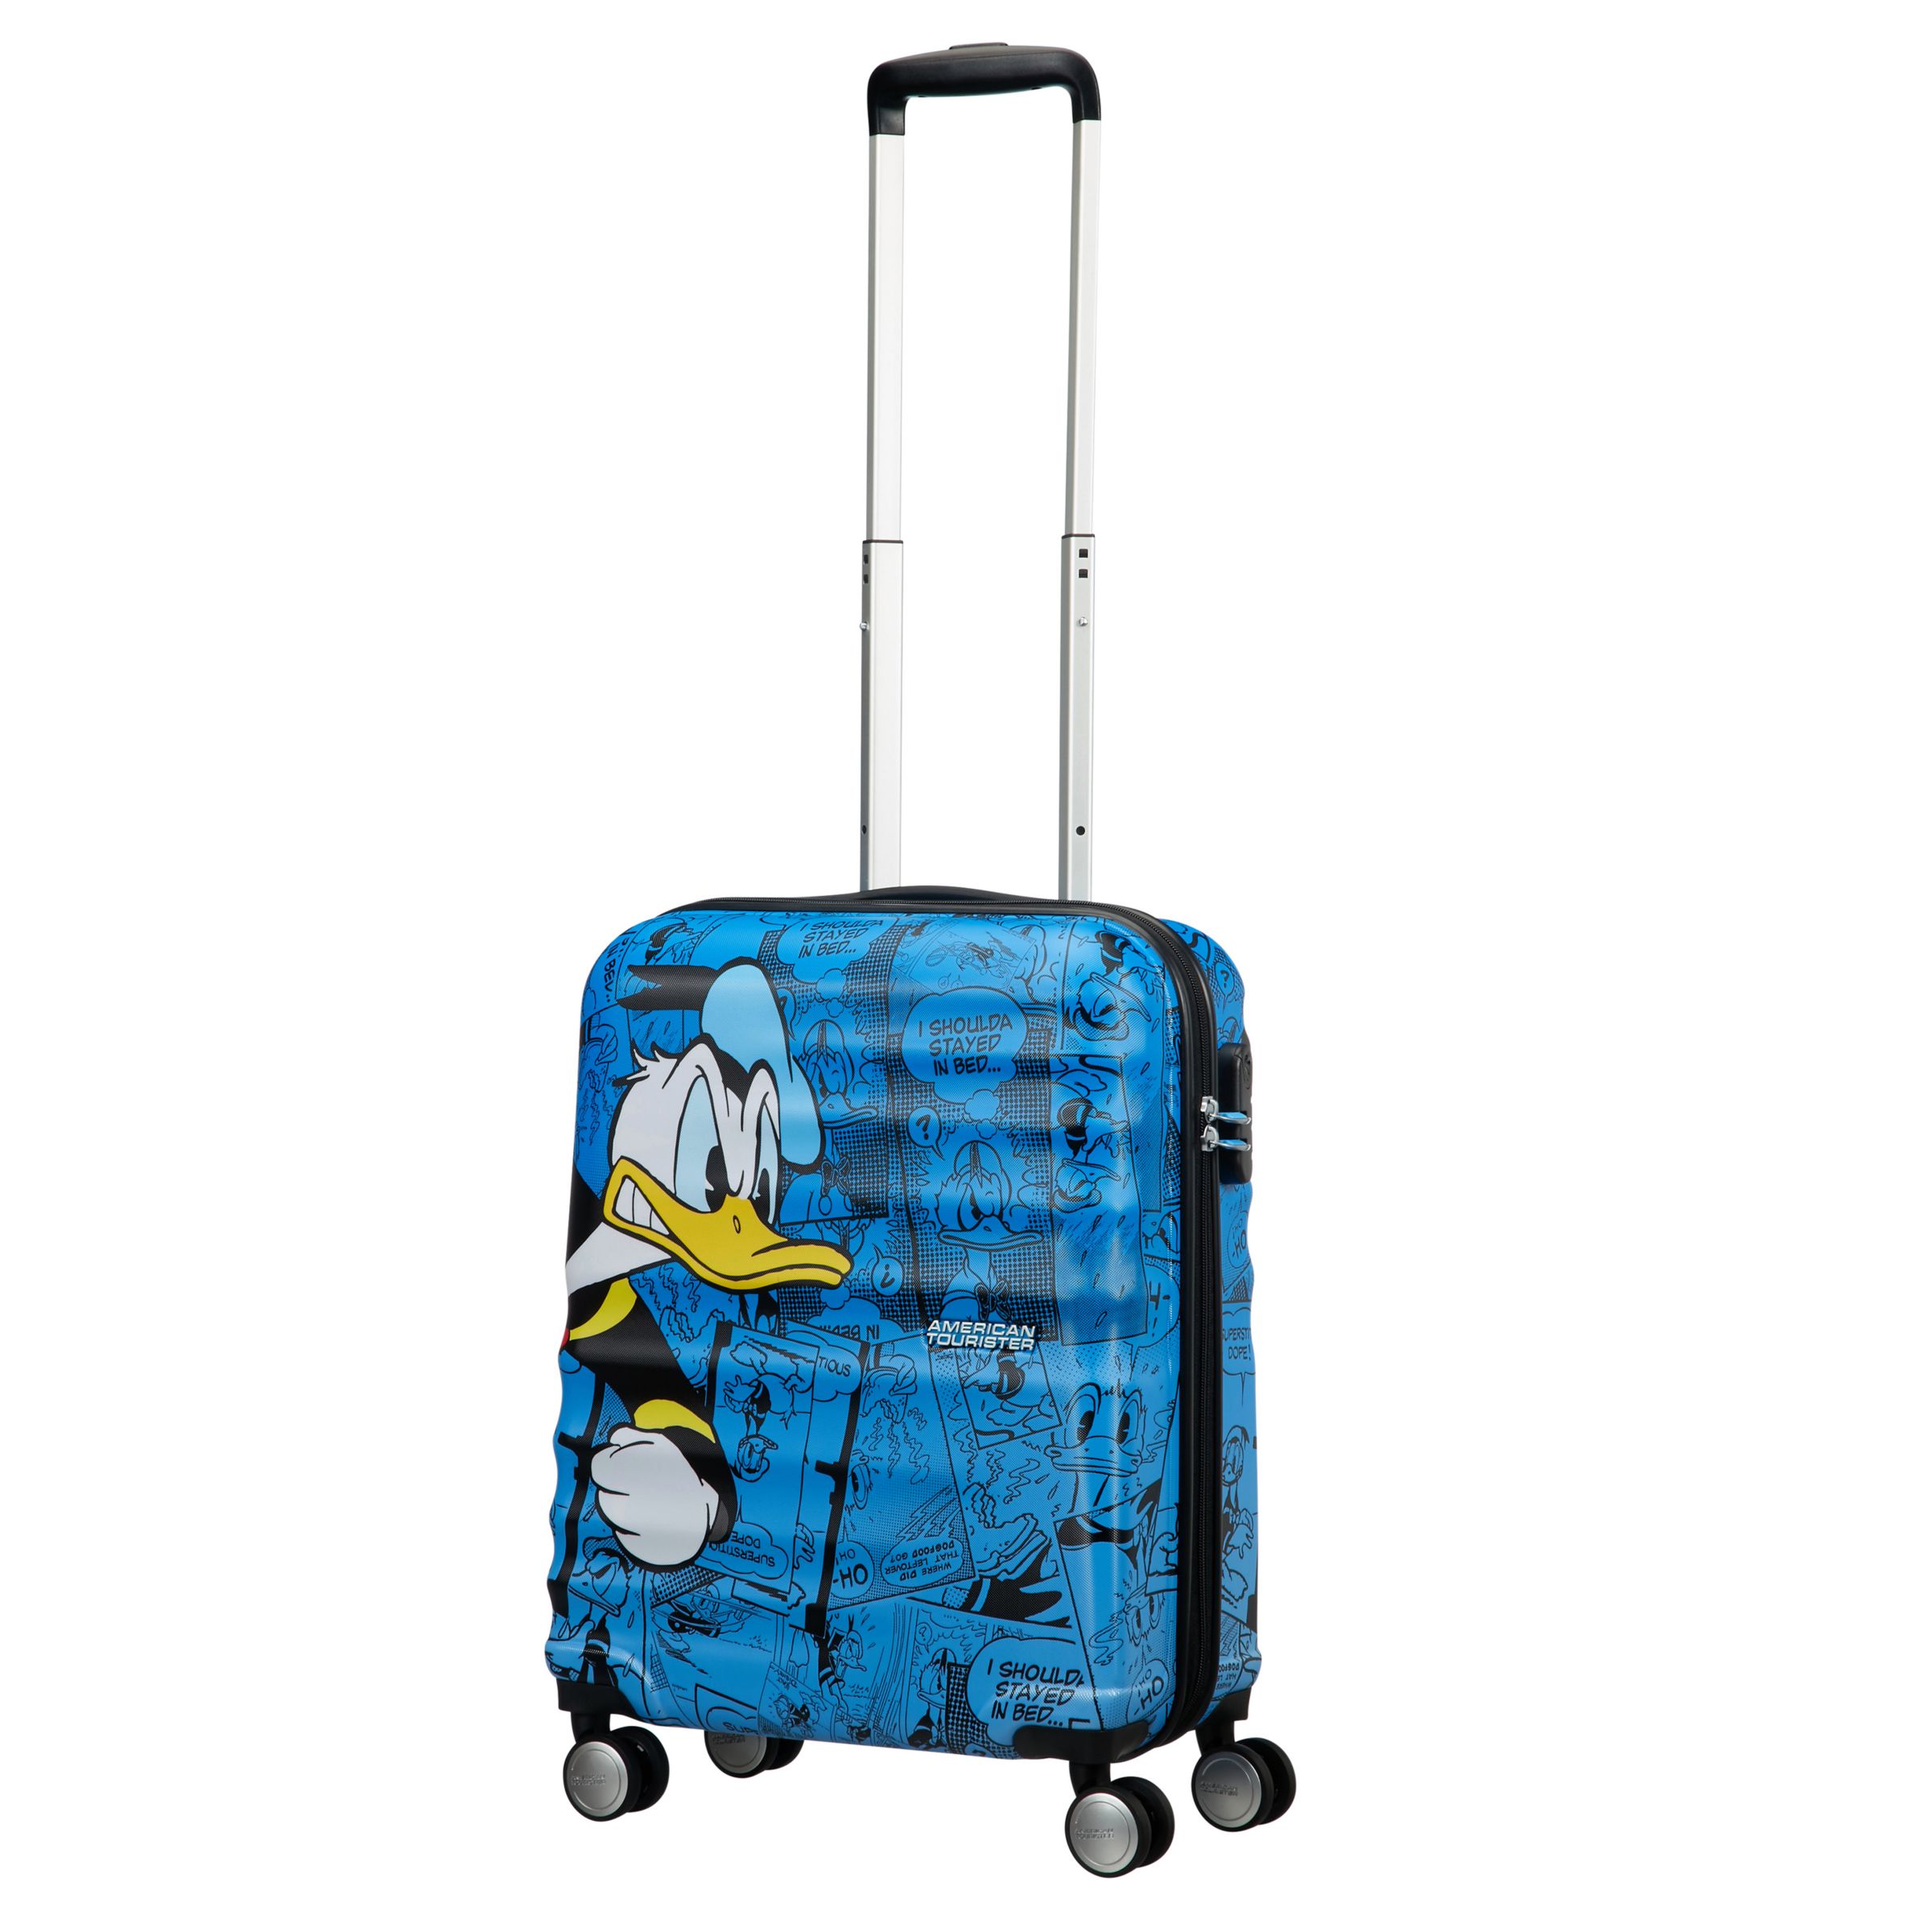 donald duck carry on luggage